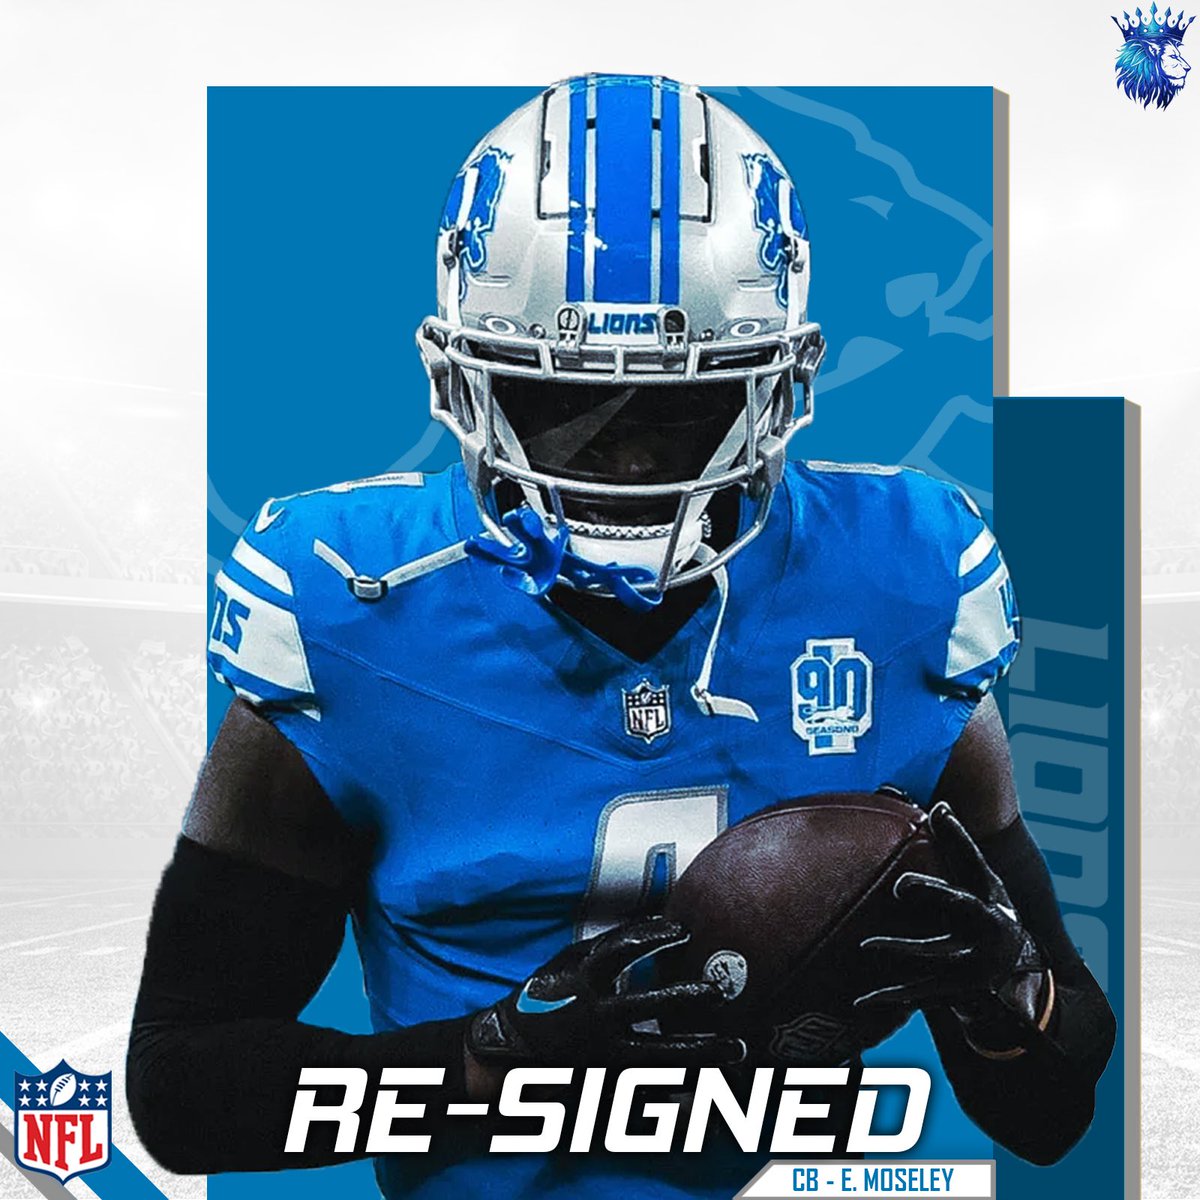 The #Lions have re-signed CB Emmanuel Moseley #OnePride